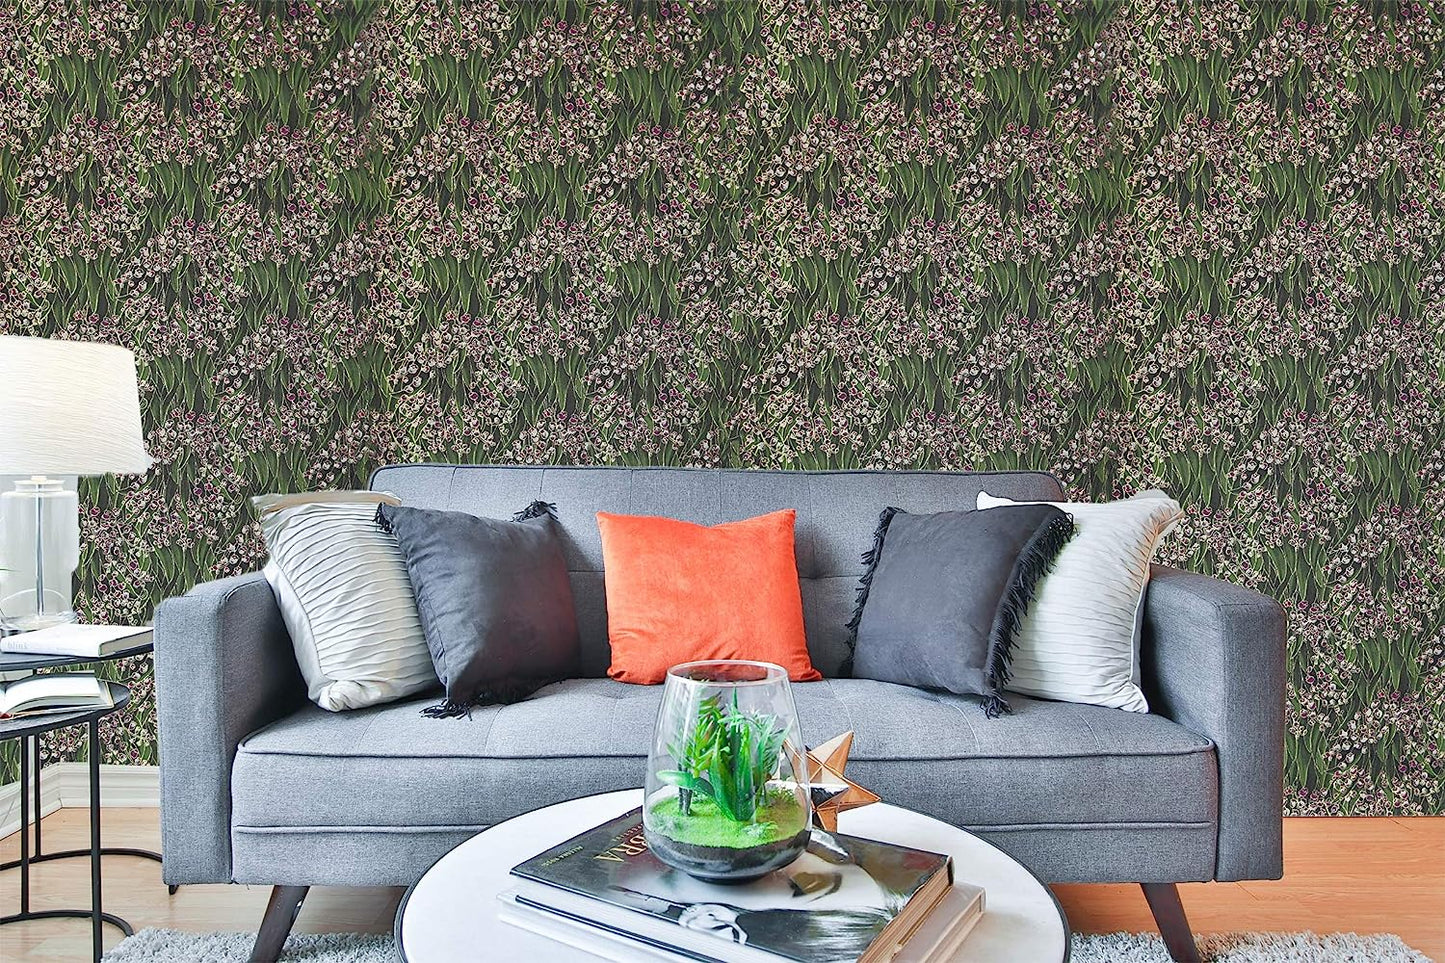 3D Latest Floral Design Green Wallpaper Roll for Home Walls 57 Sq Ft (0.53m or 21 Inches x 10m or 33 Feet)